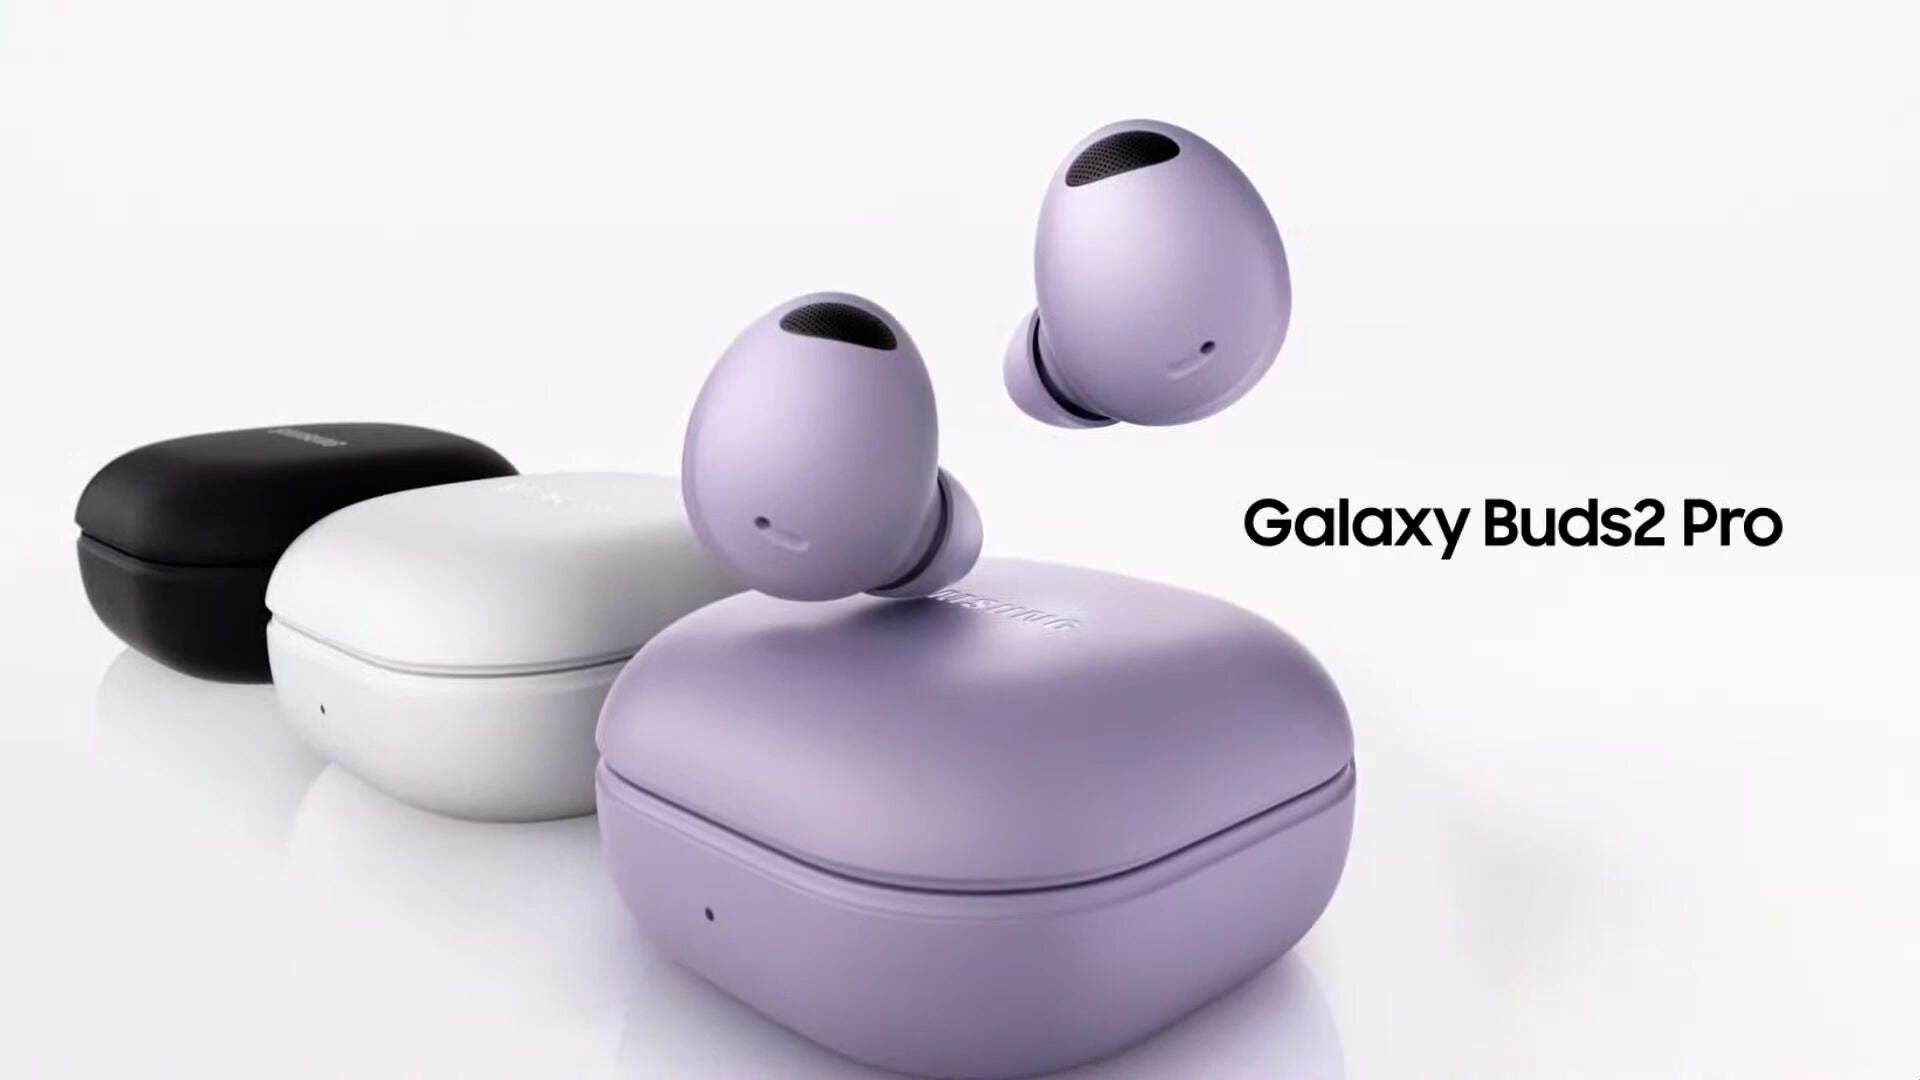 Galaxy Buds: Official Introduction